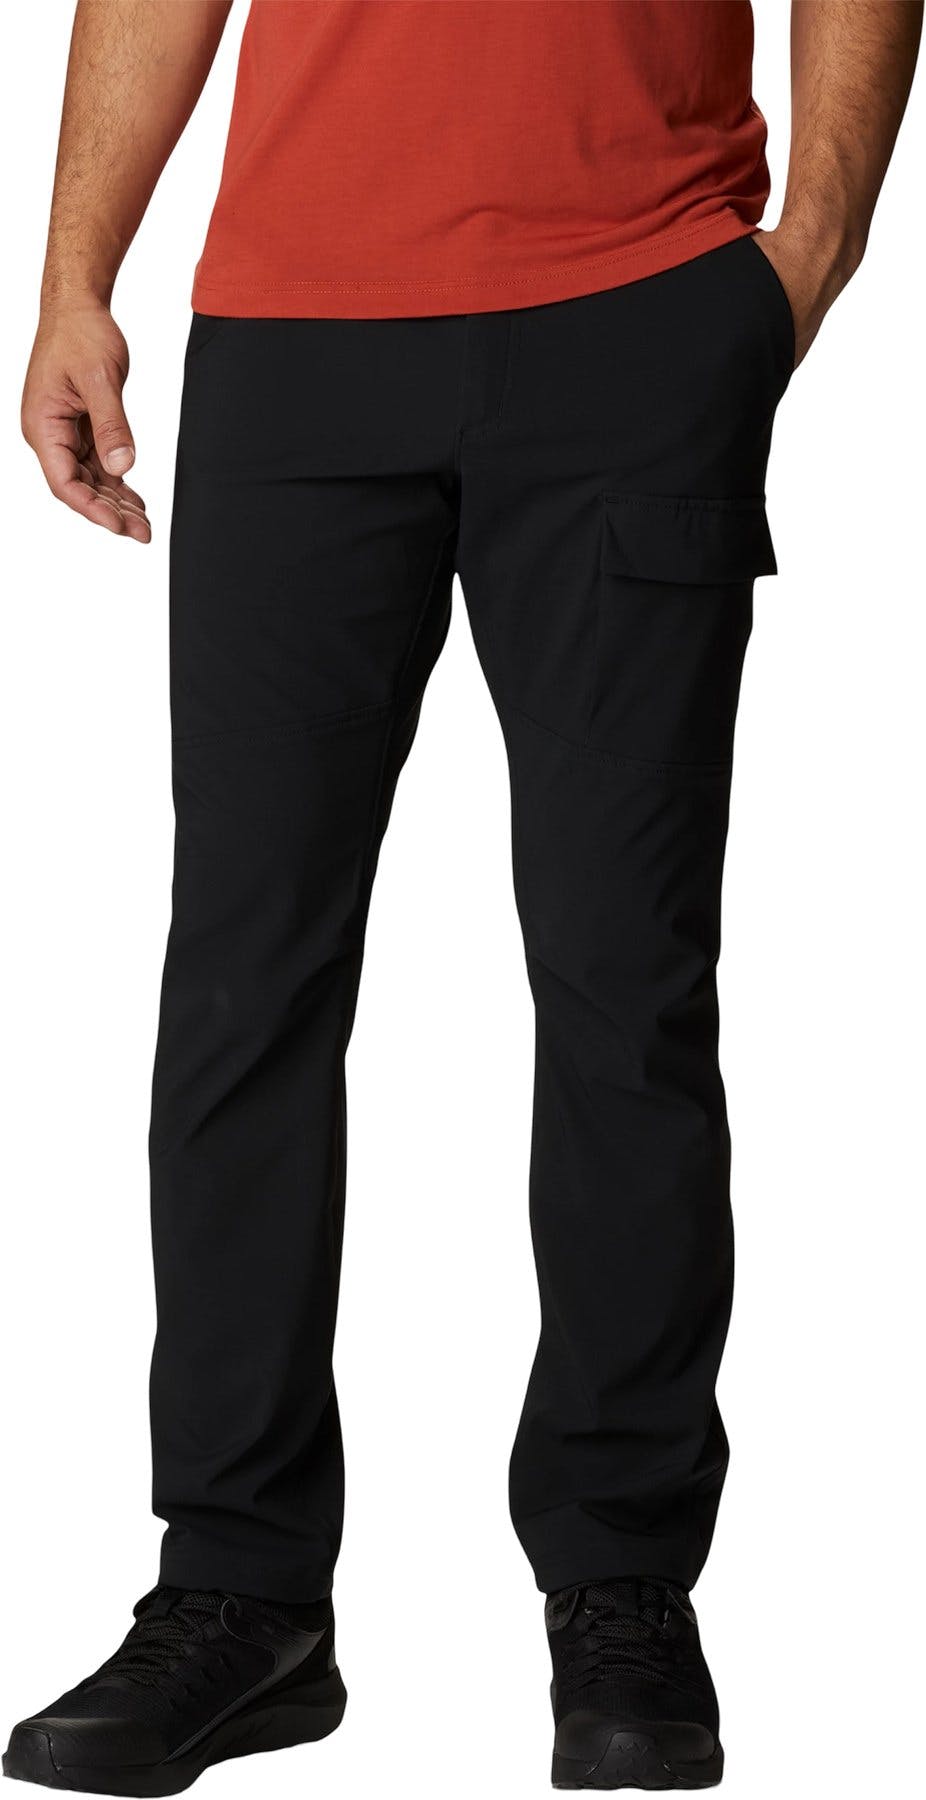 Product image for Maxtrail Midweight Warm Pants - Men's